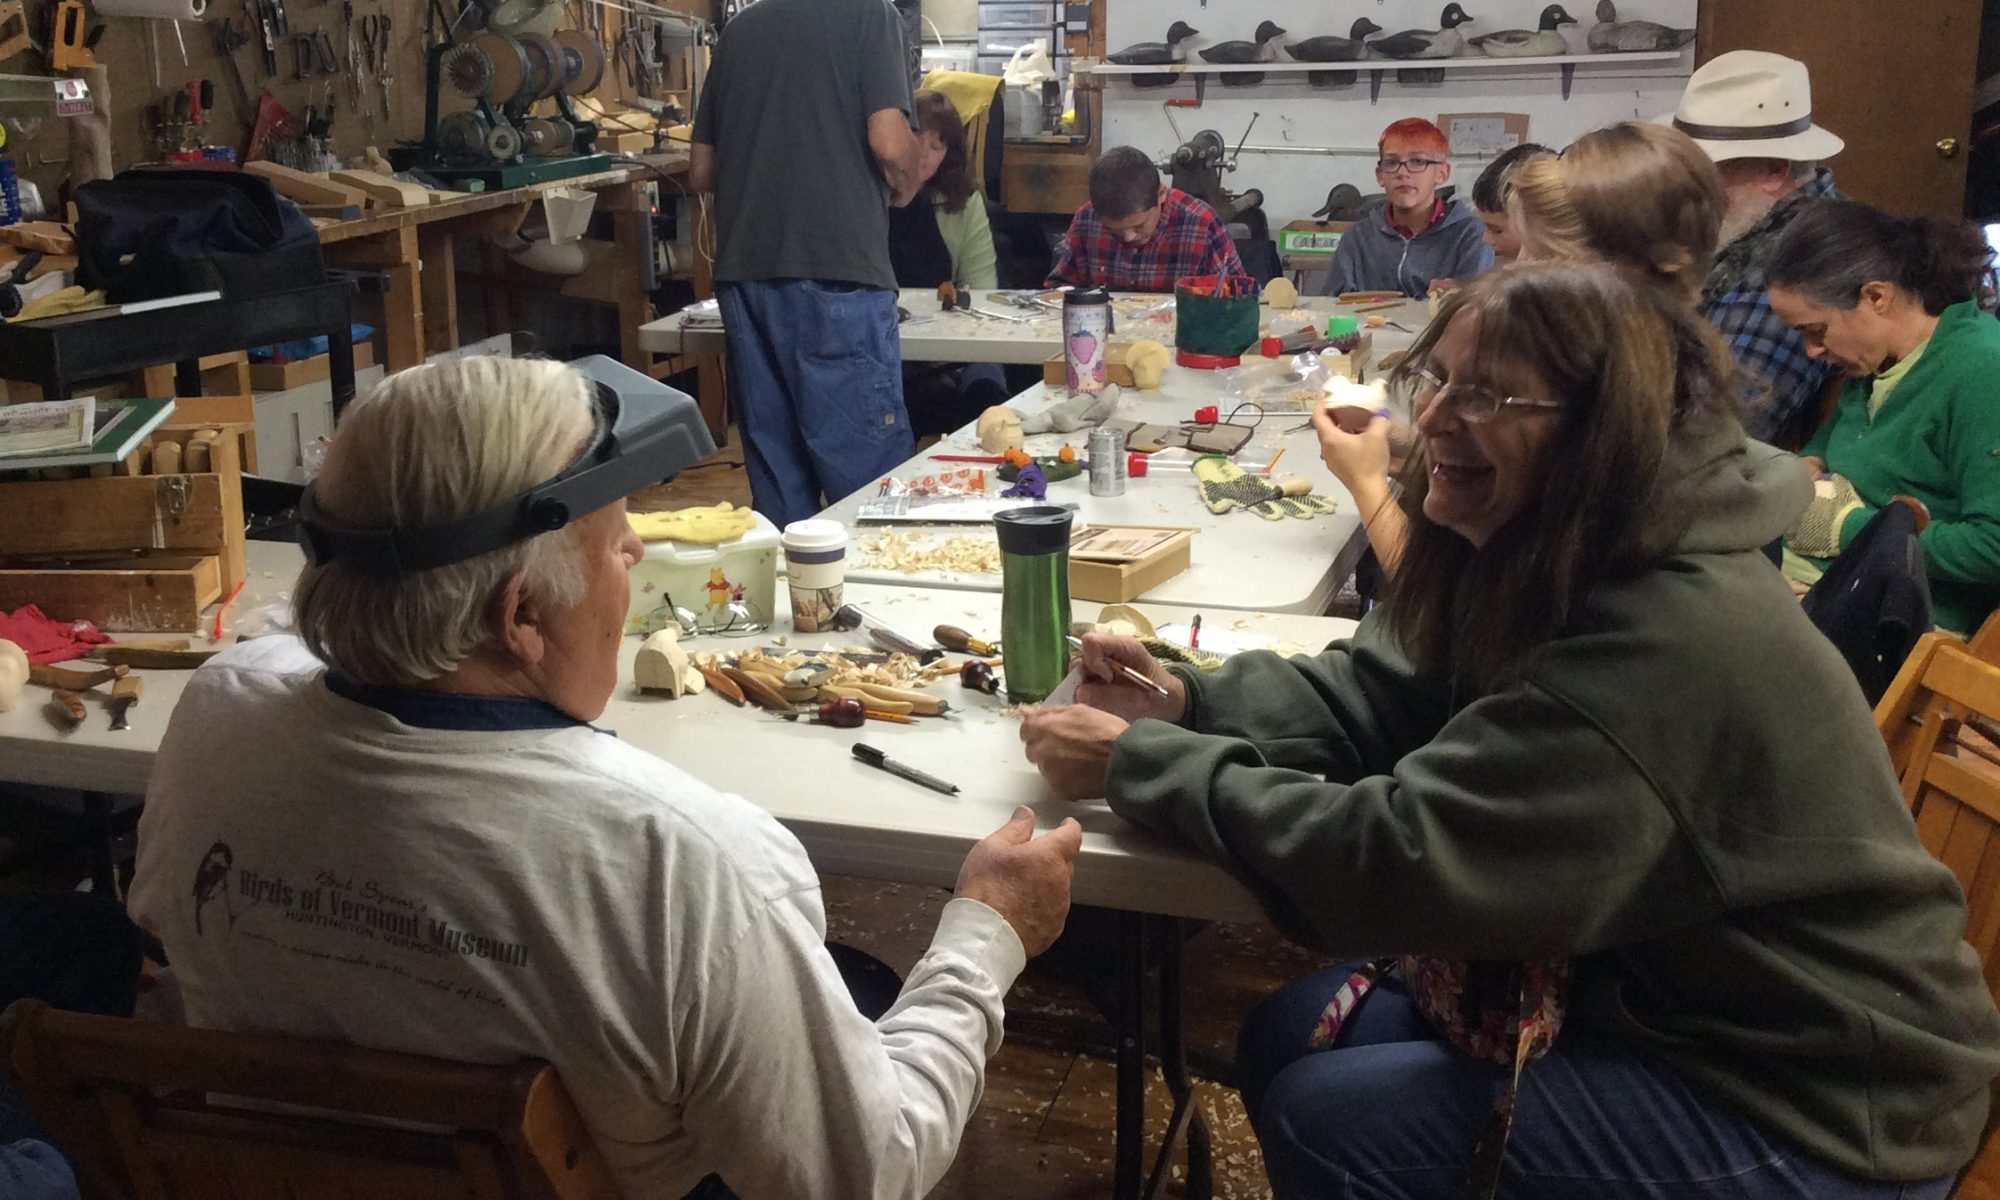 Several woodcarvers carving, painting, and chatting at tables in the workshop at the Birds of Vermont Museum.